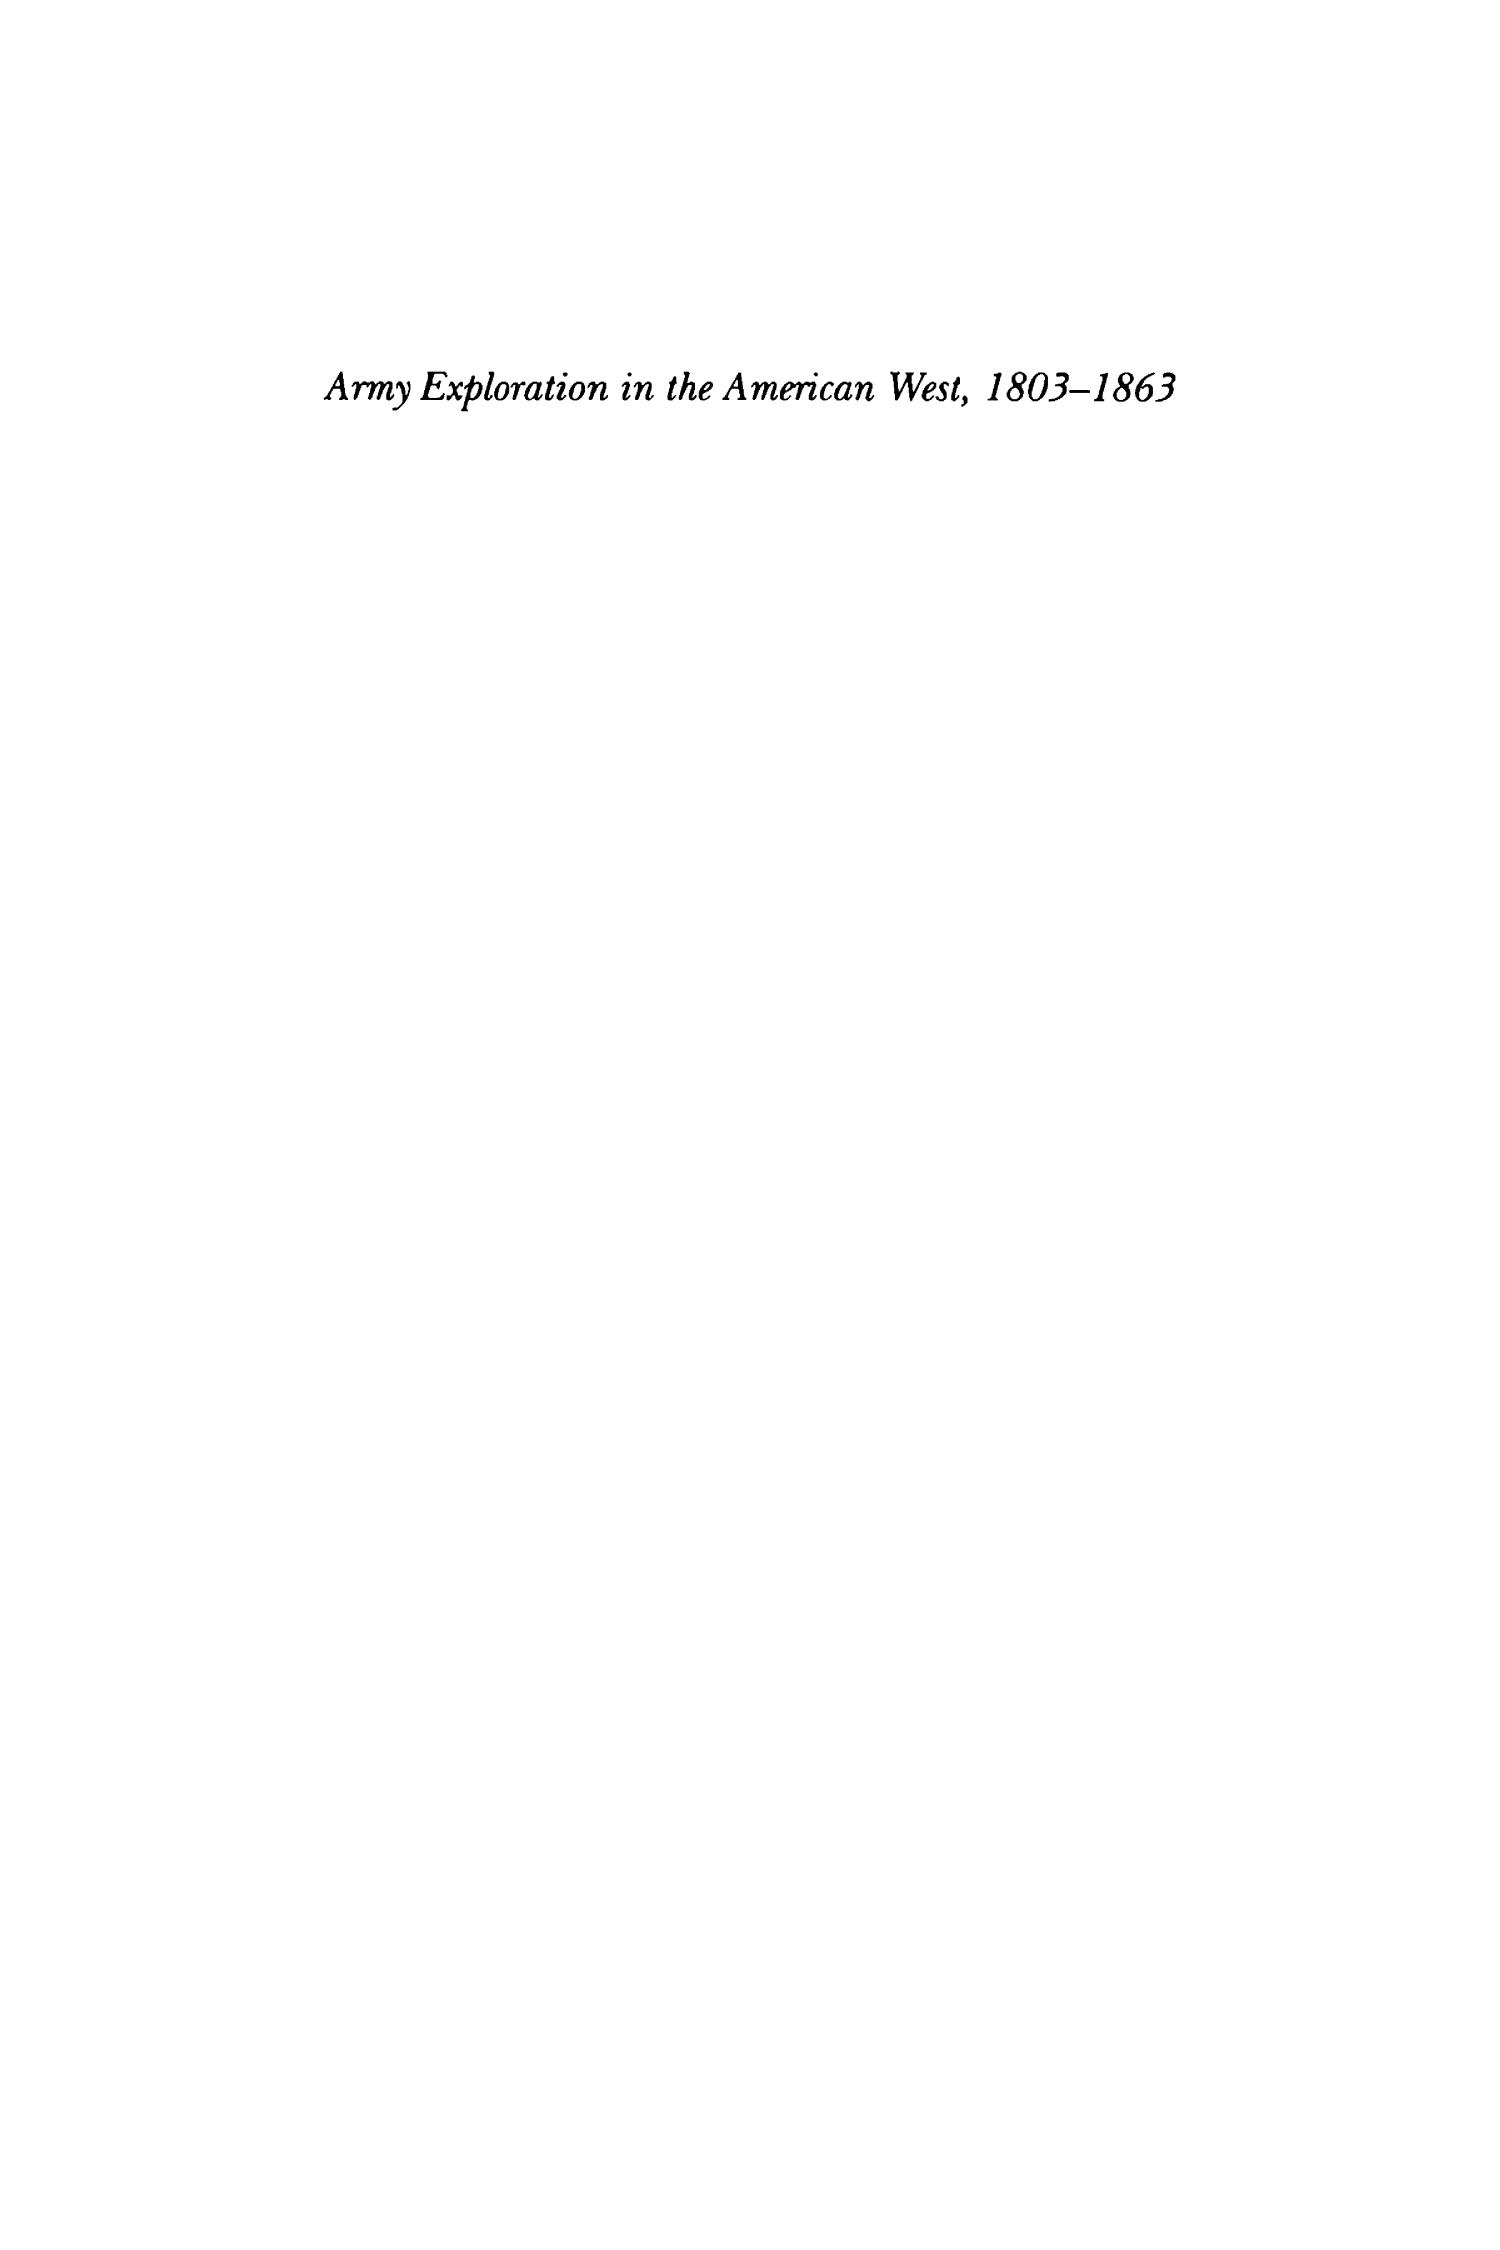 Army Exploration in the American West, 1803-1863
                                                
                                                    I
                                                